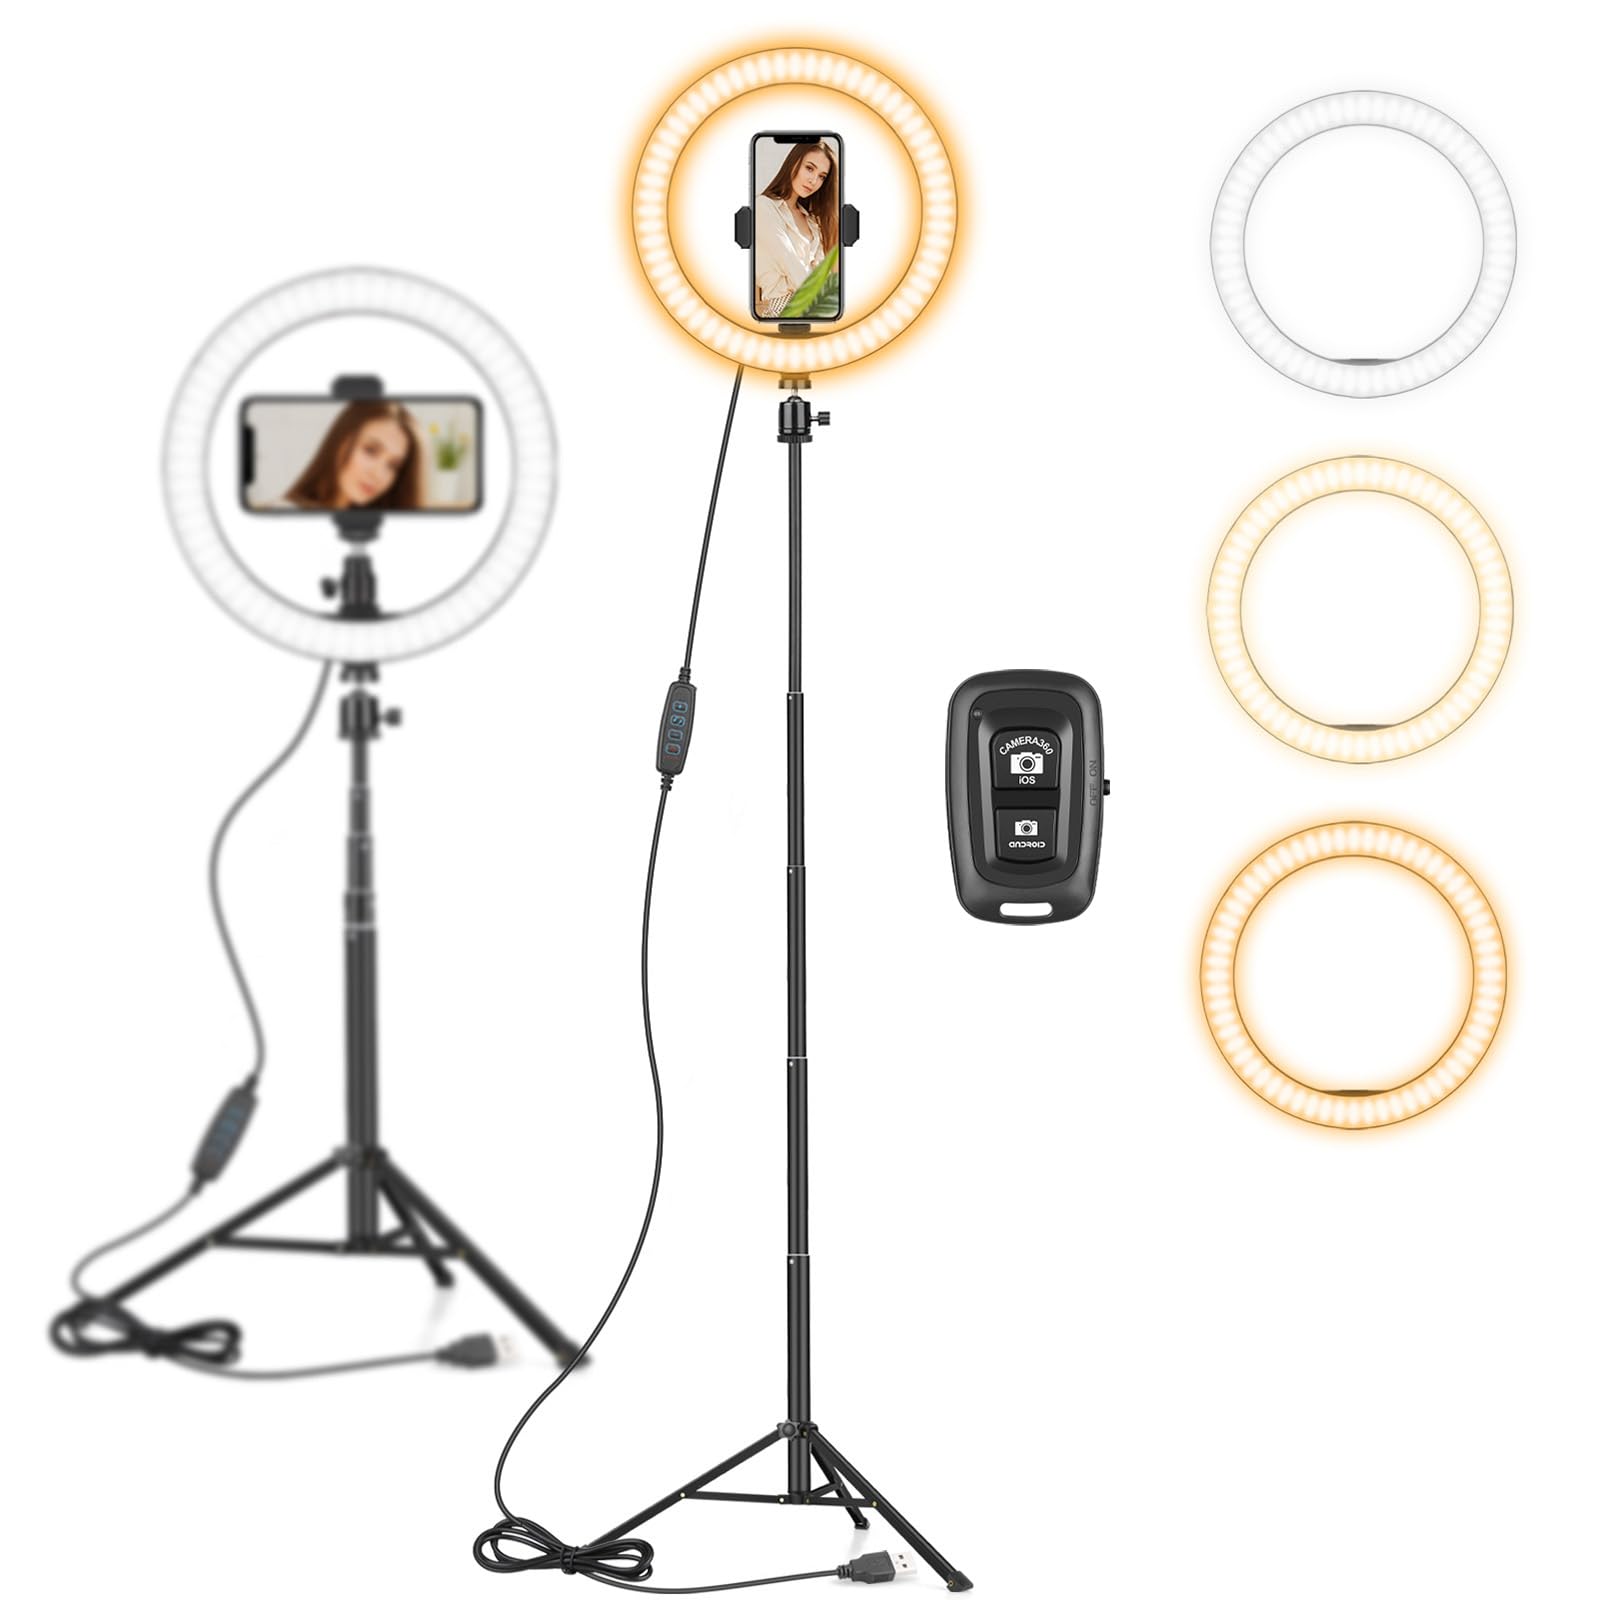 10" Ring Light with 59" Tripod Stand & Phone Holder for YouTube Video, Dimmable Led Ring Light for Camera, Video, Makeup, Selfie Photography Compatible with Smartphone